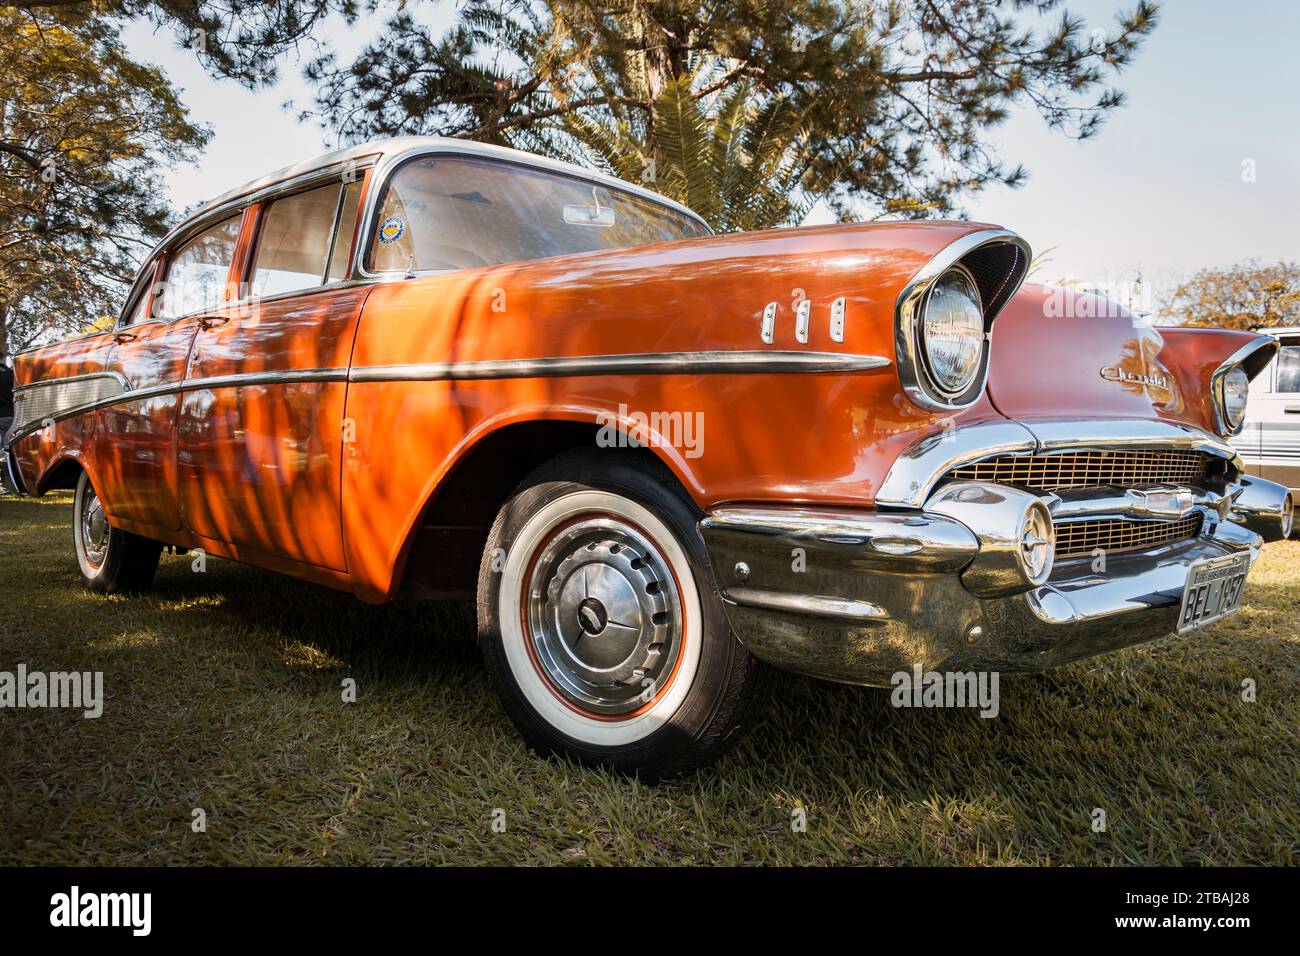 Vehicle Chevrolet Bel Air 1957 on display at the monthly meeting of vintage cars in the city of Londrina, Brazil. Stock Photo